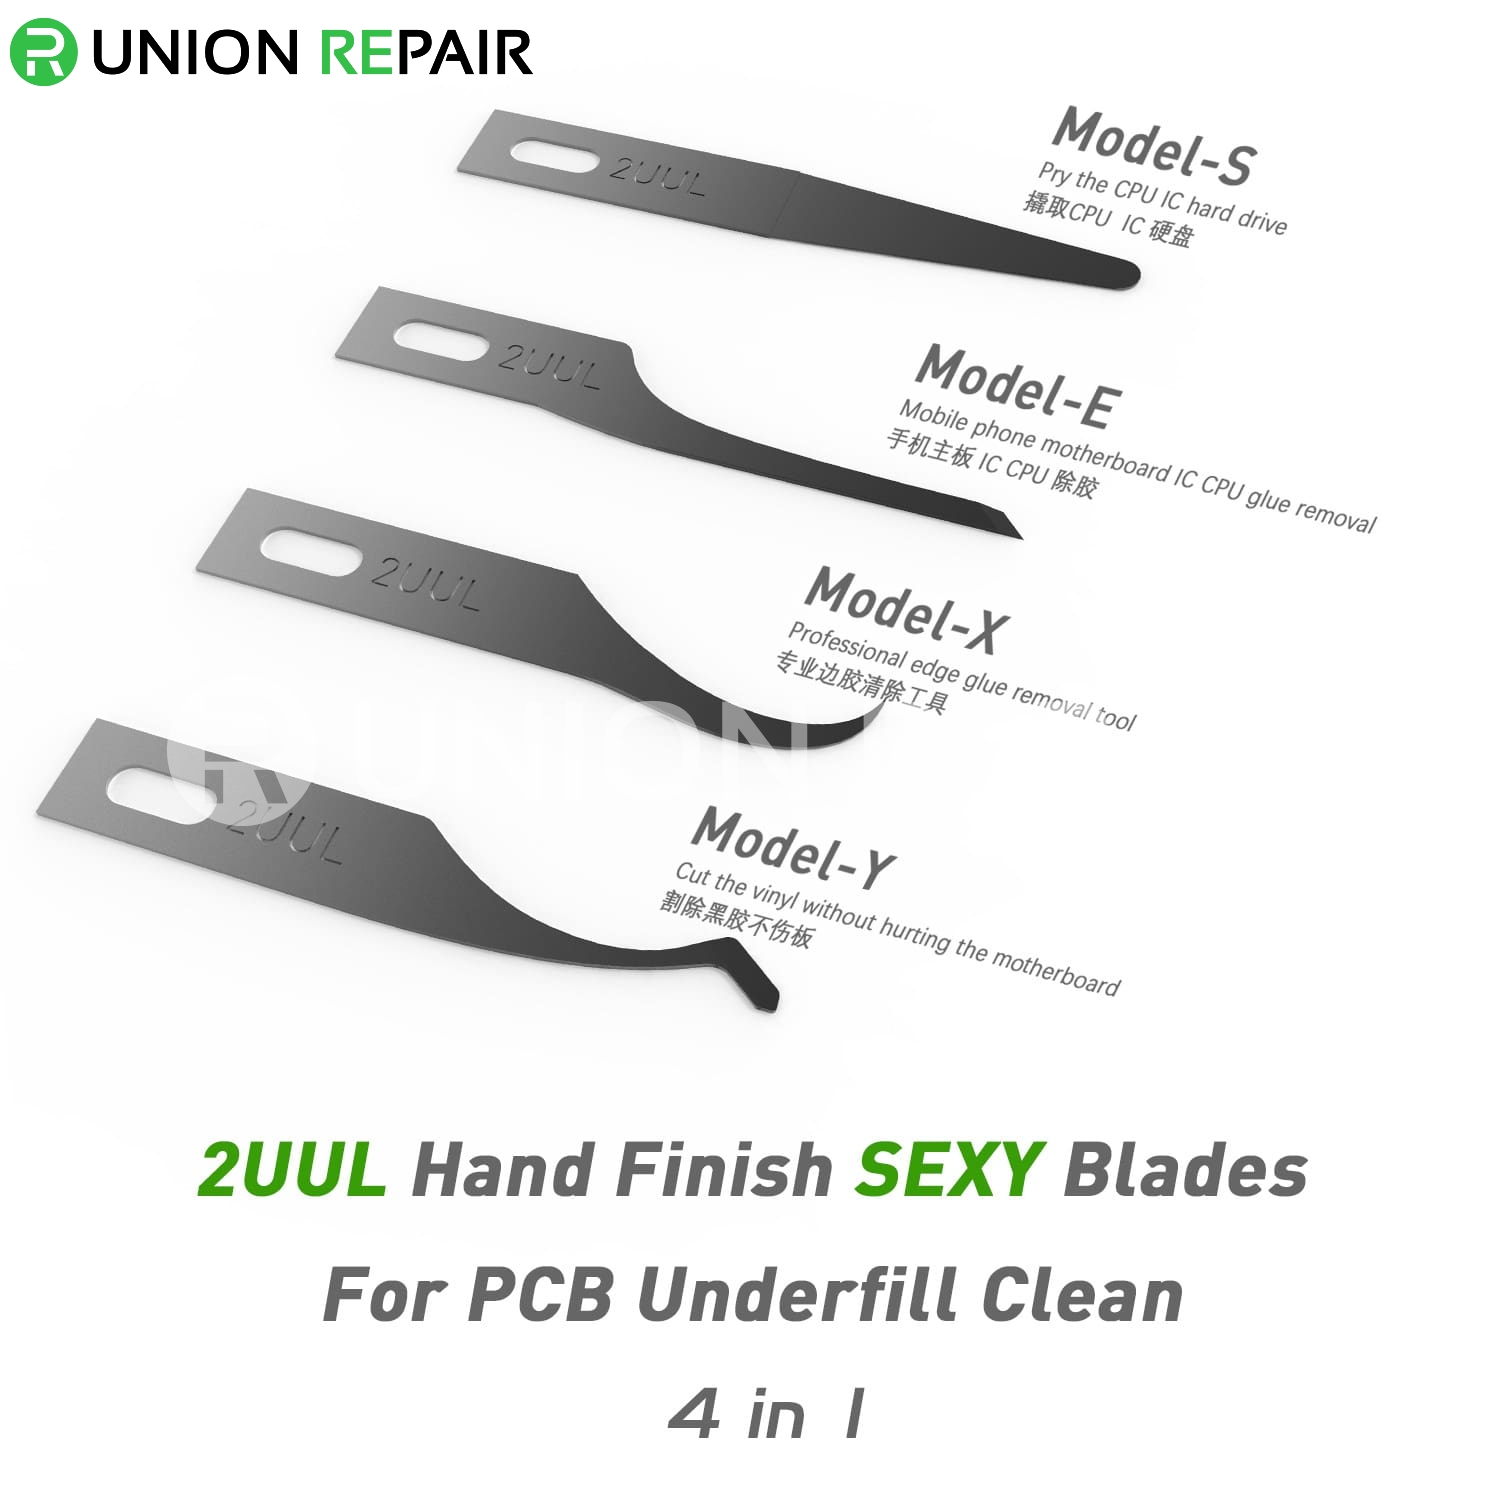 2UUL Hand Finish SEXY Blades Set for PCB Underfill Clean